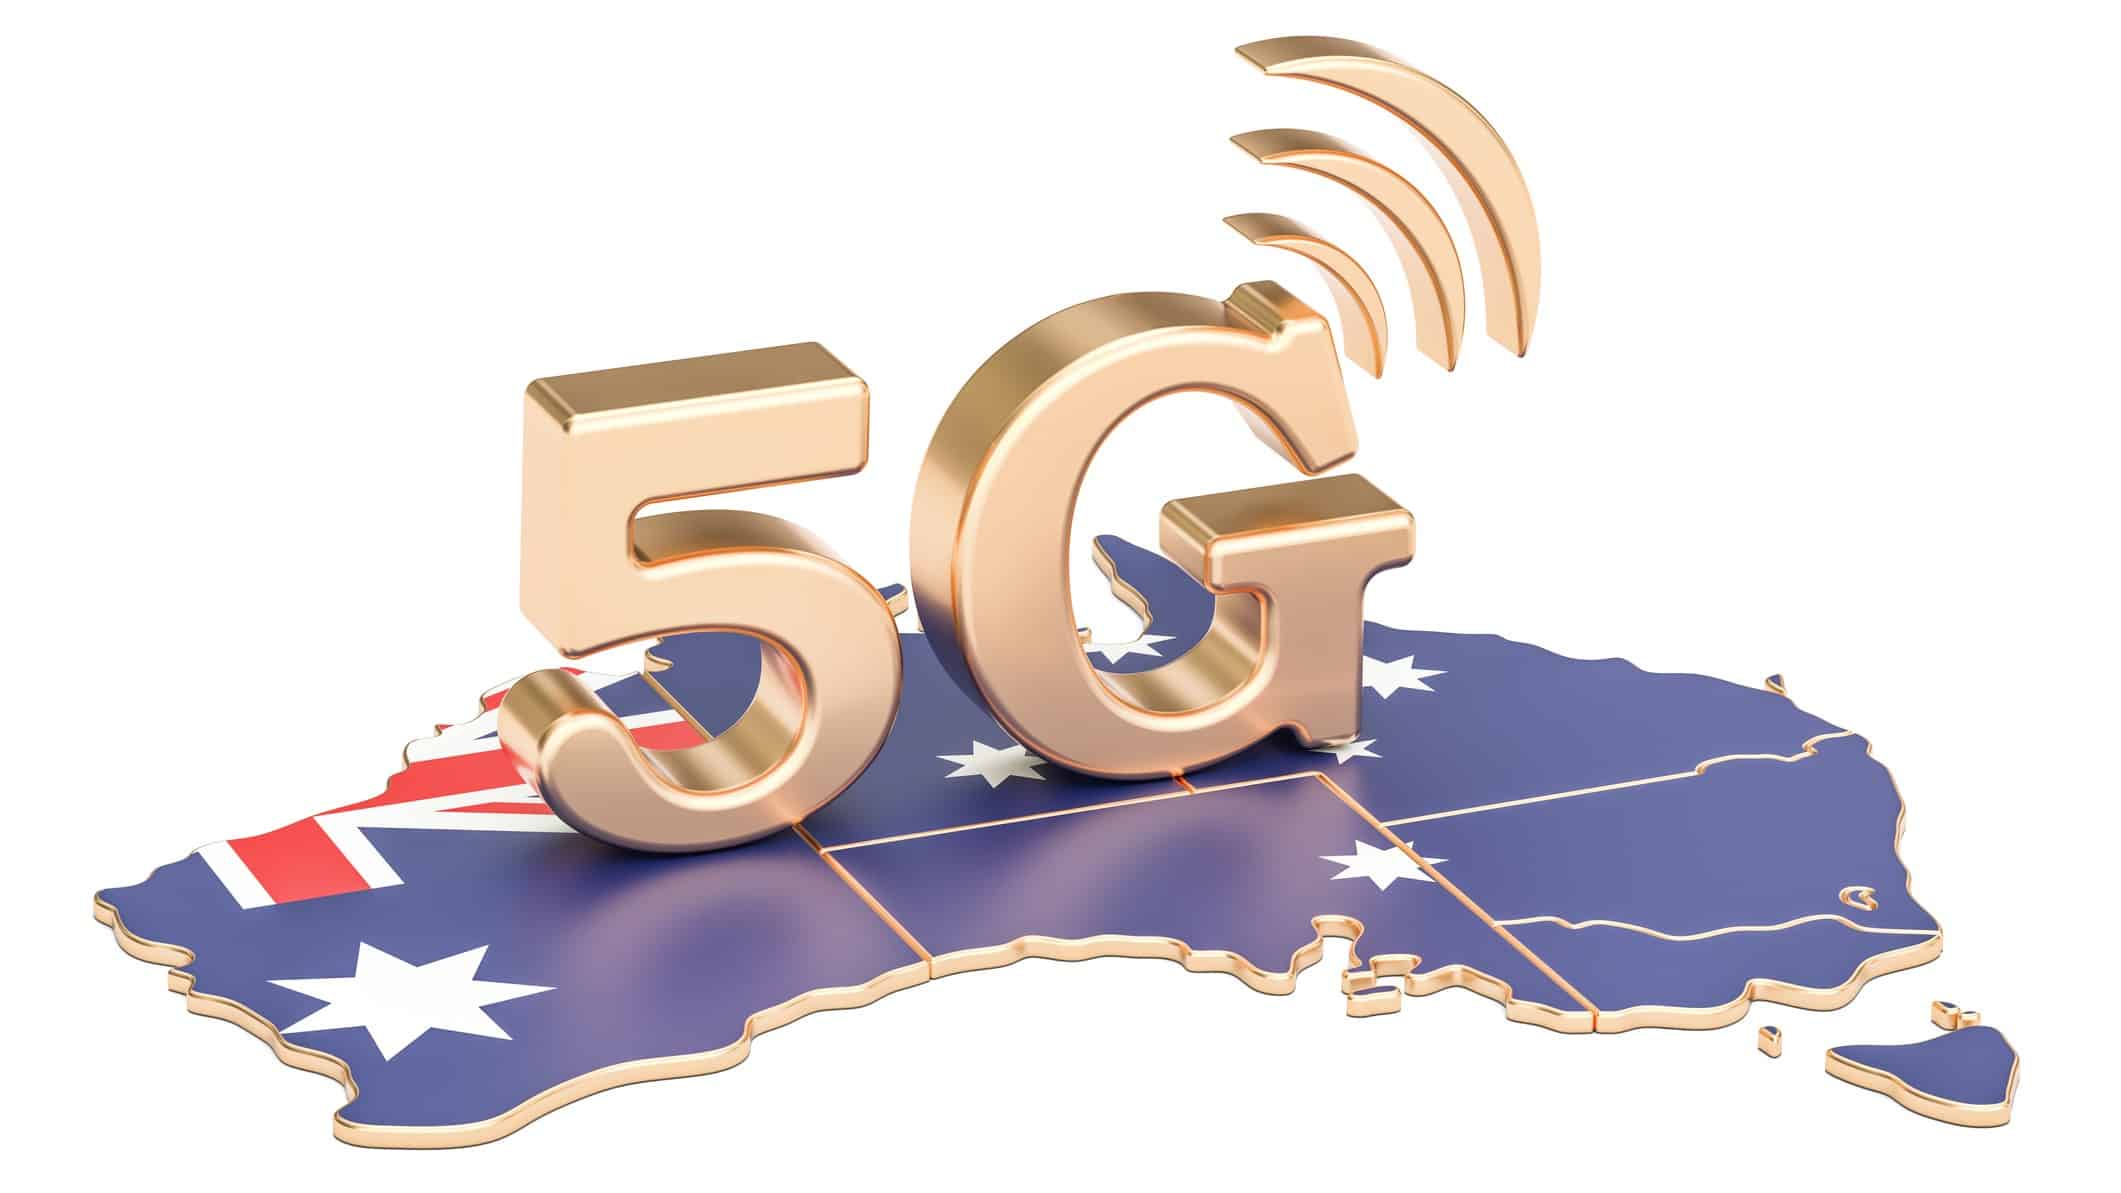 map of australia with golden 5G sitting on it representing telstra share price profit result